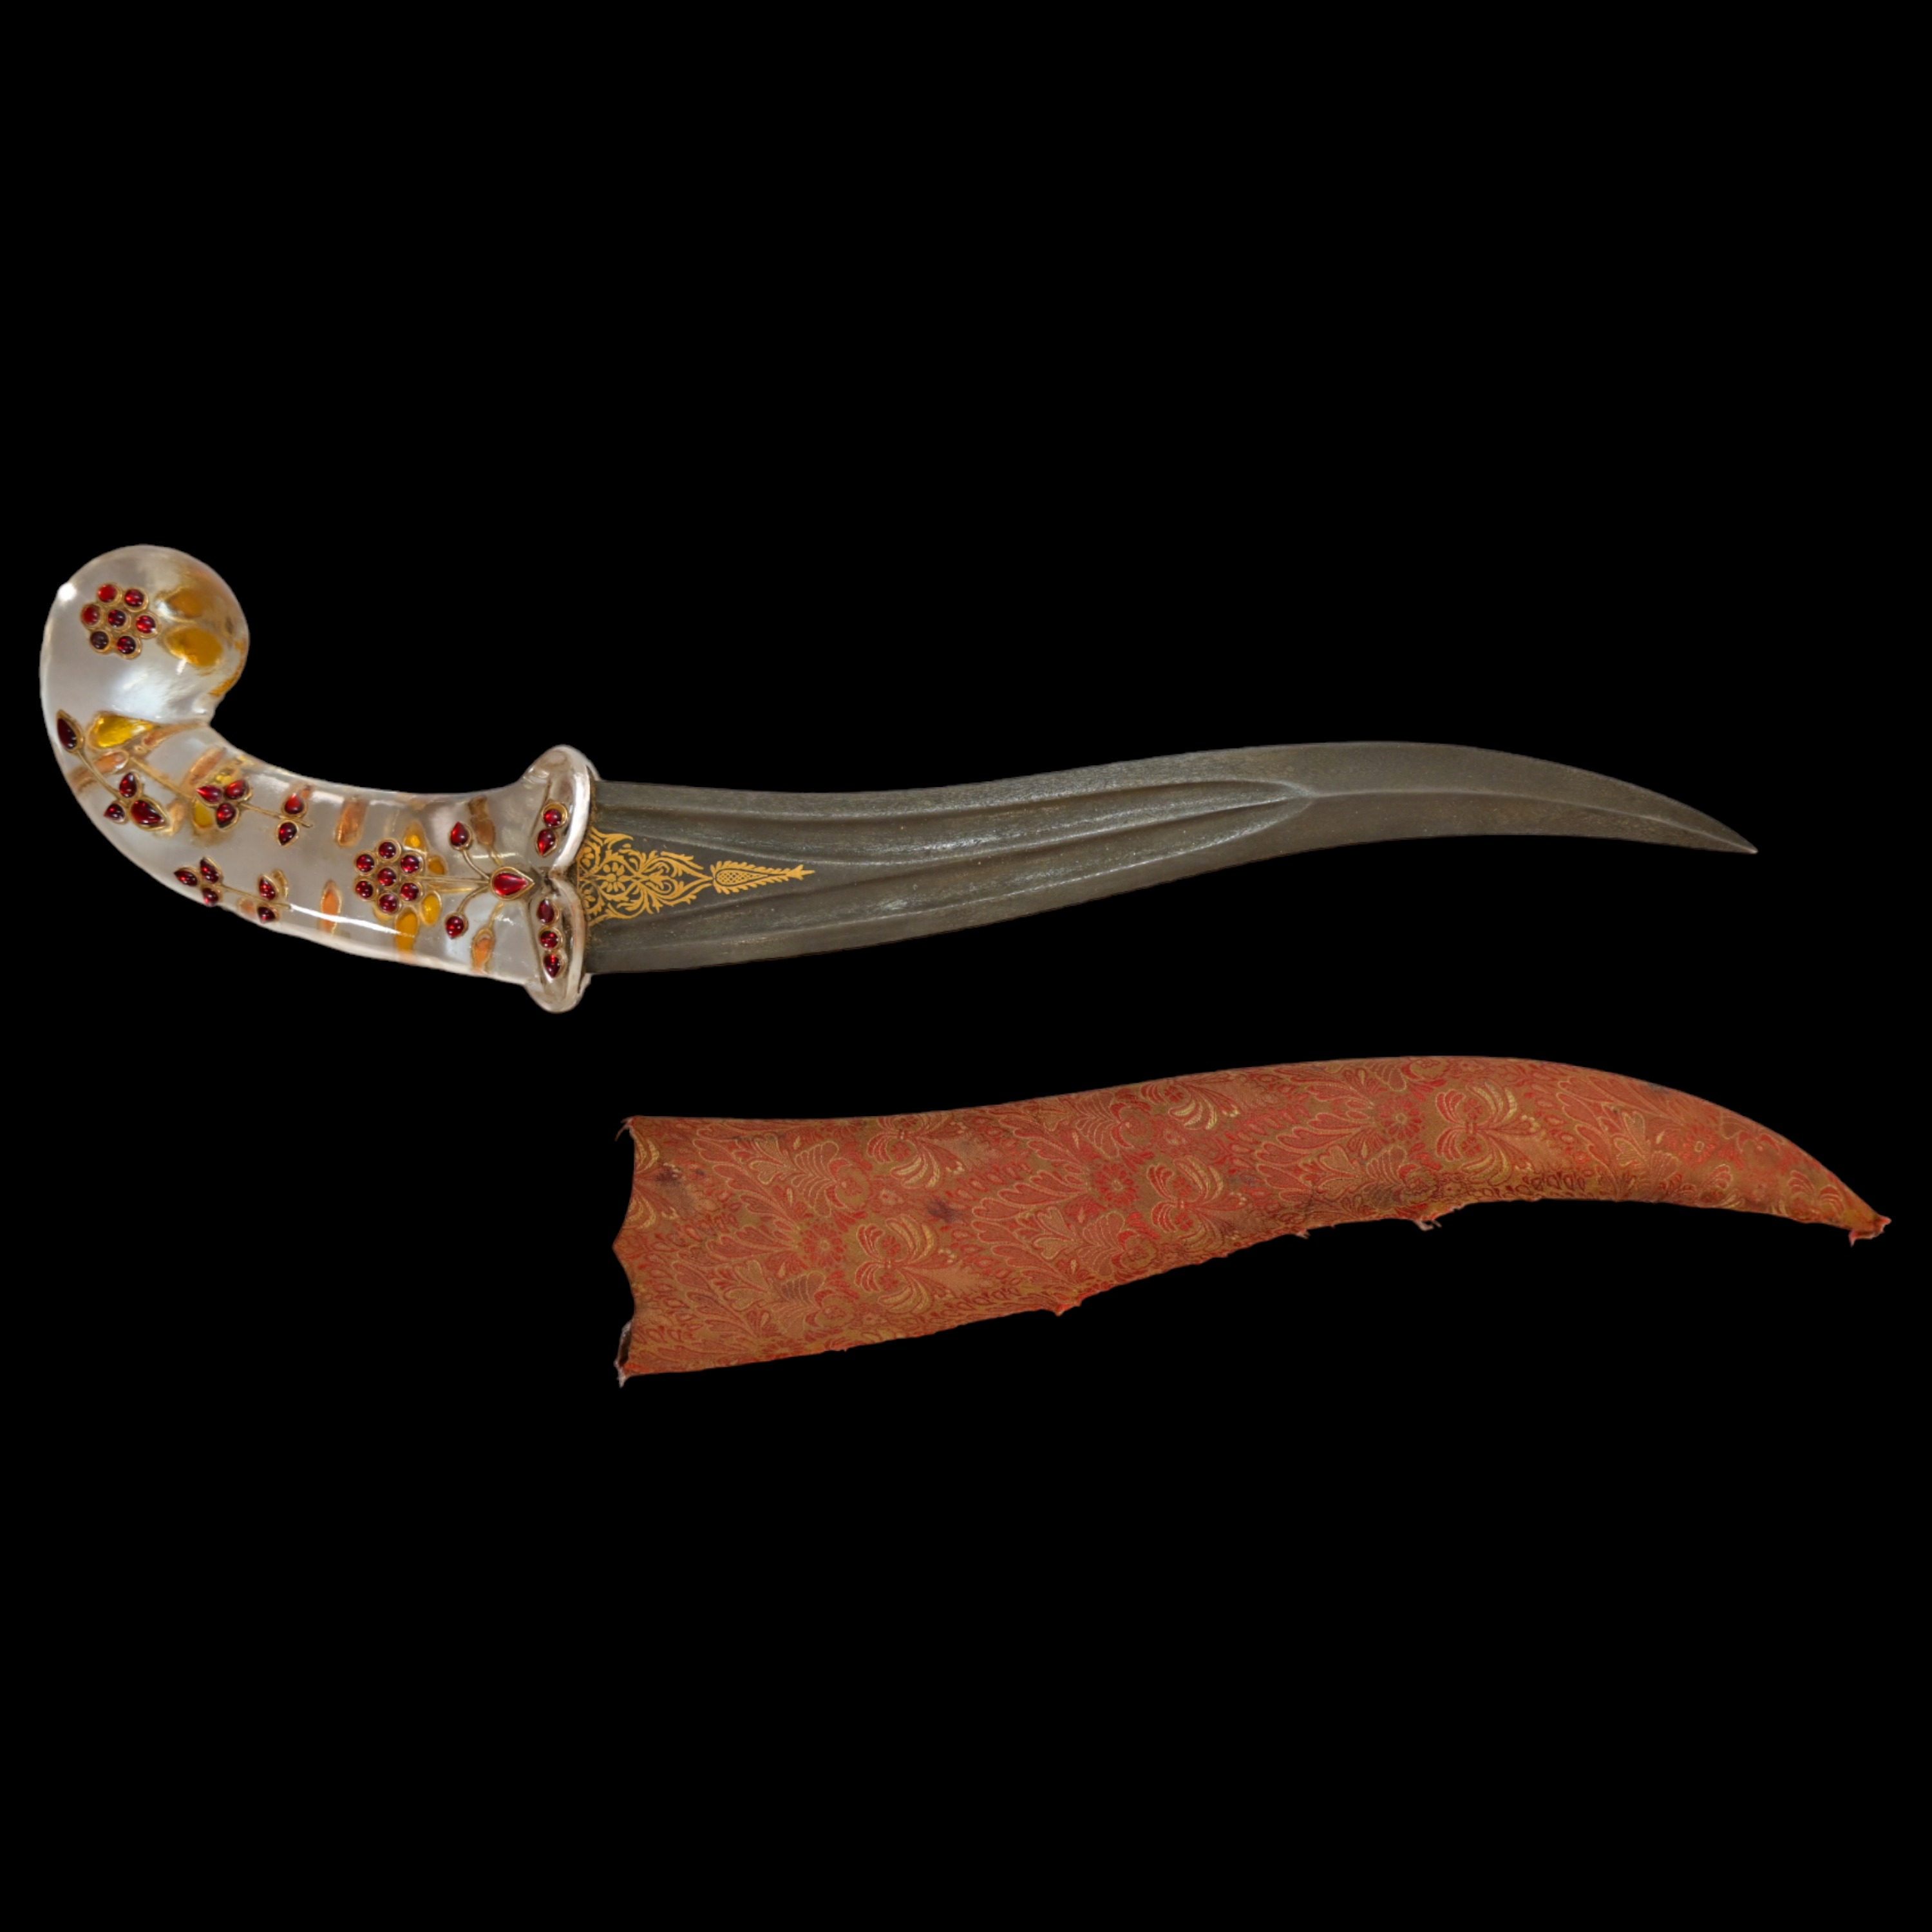 A Rare Mughal gem-set rock crystal hilted dagger with scabbard, India, 18th century. - Image 7 of 13